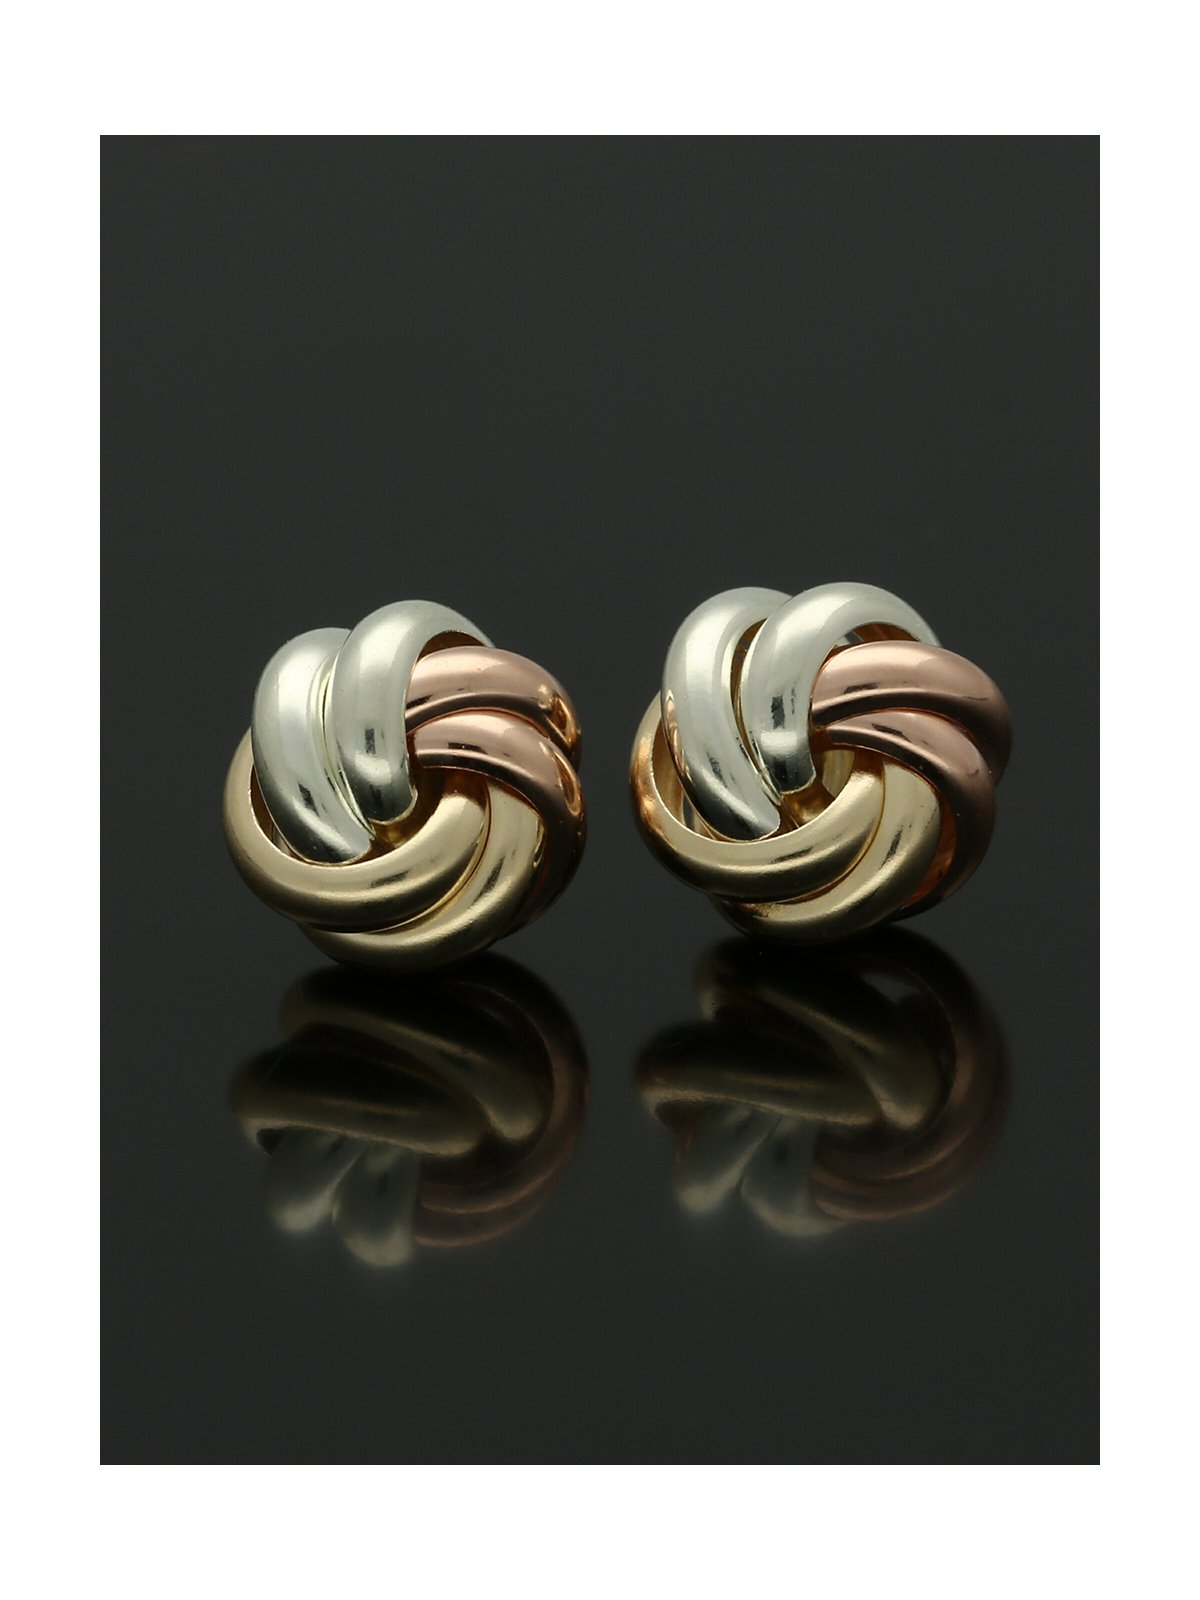 Knot Stud Earrings 8.5mm in 9ct Yellow, White and Rose Gold